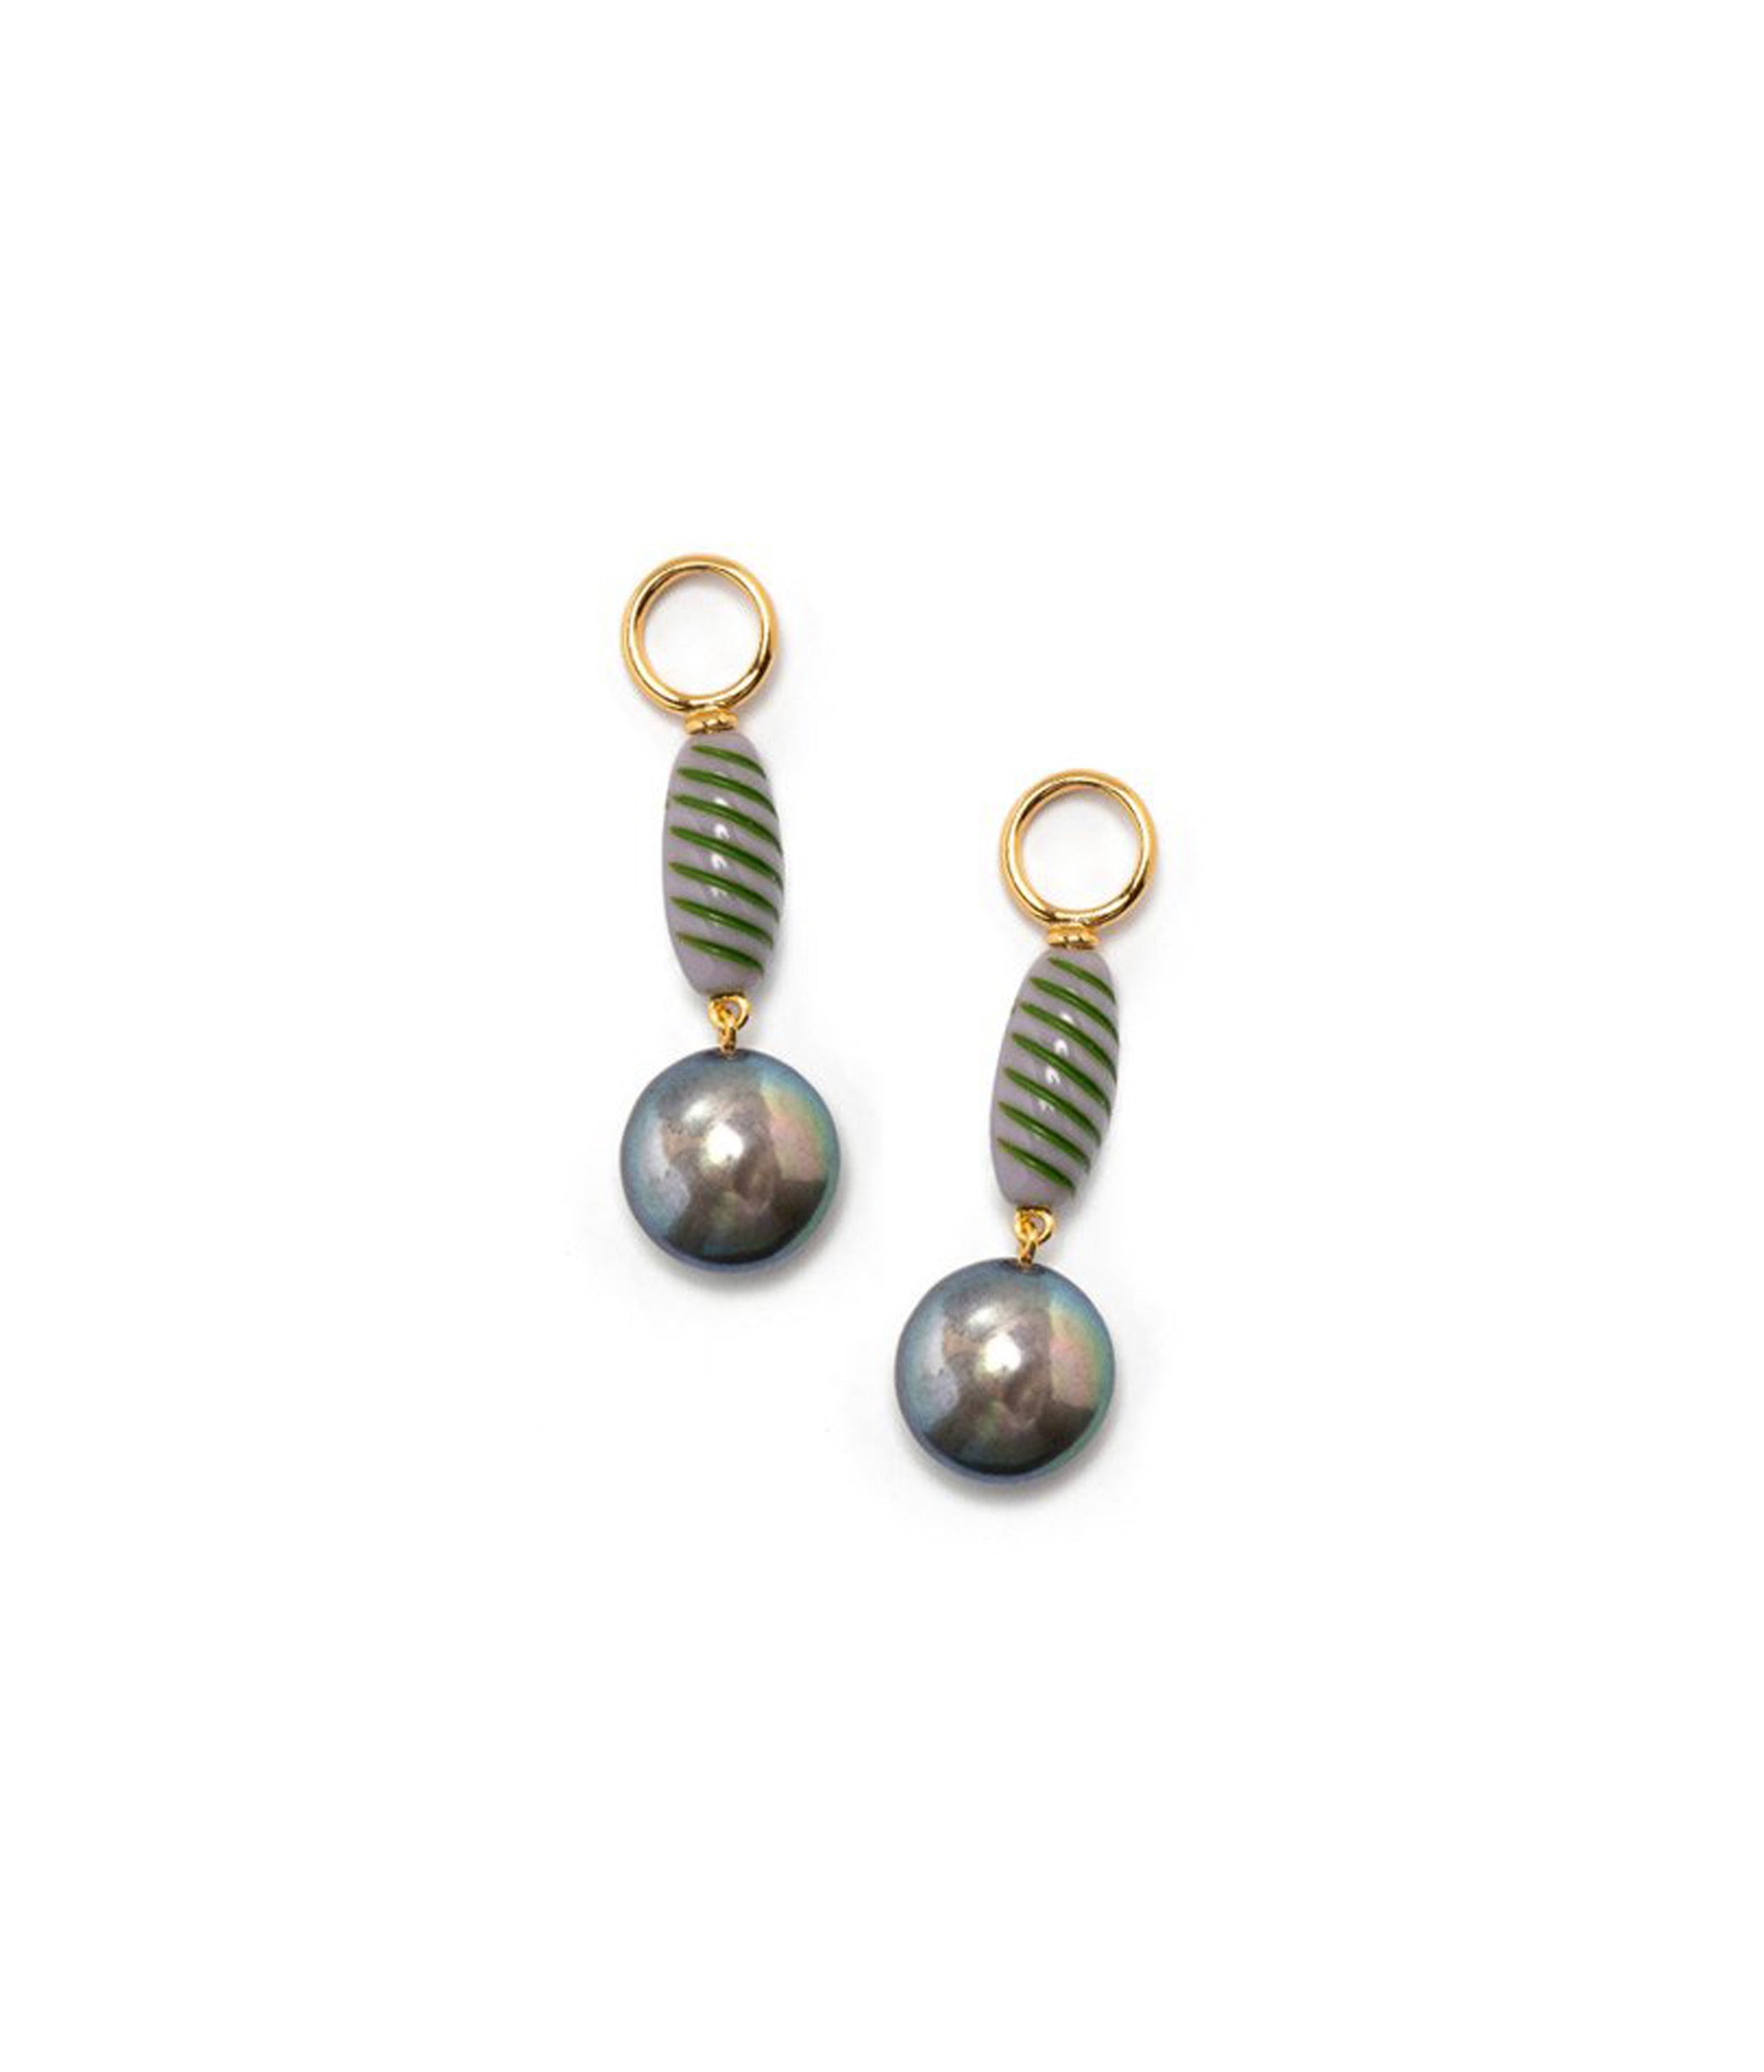 Cirque Charm. Two charms of green striped glass bead and peacock pearl drop with gold-plated brass ring. 